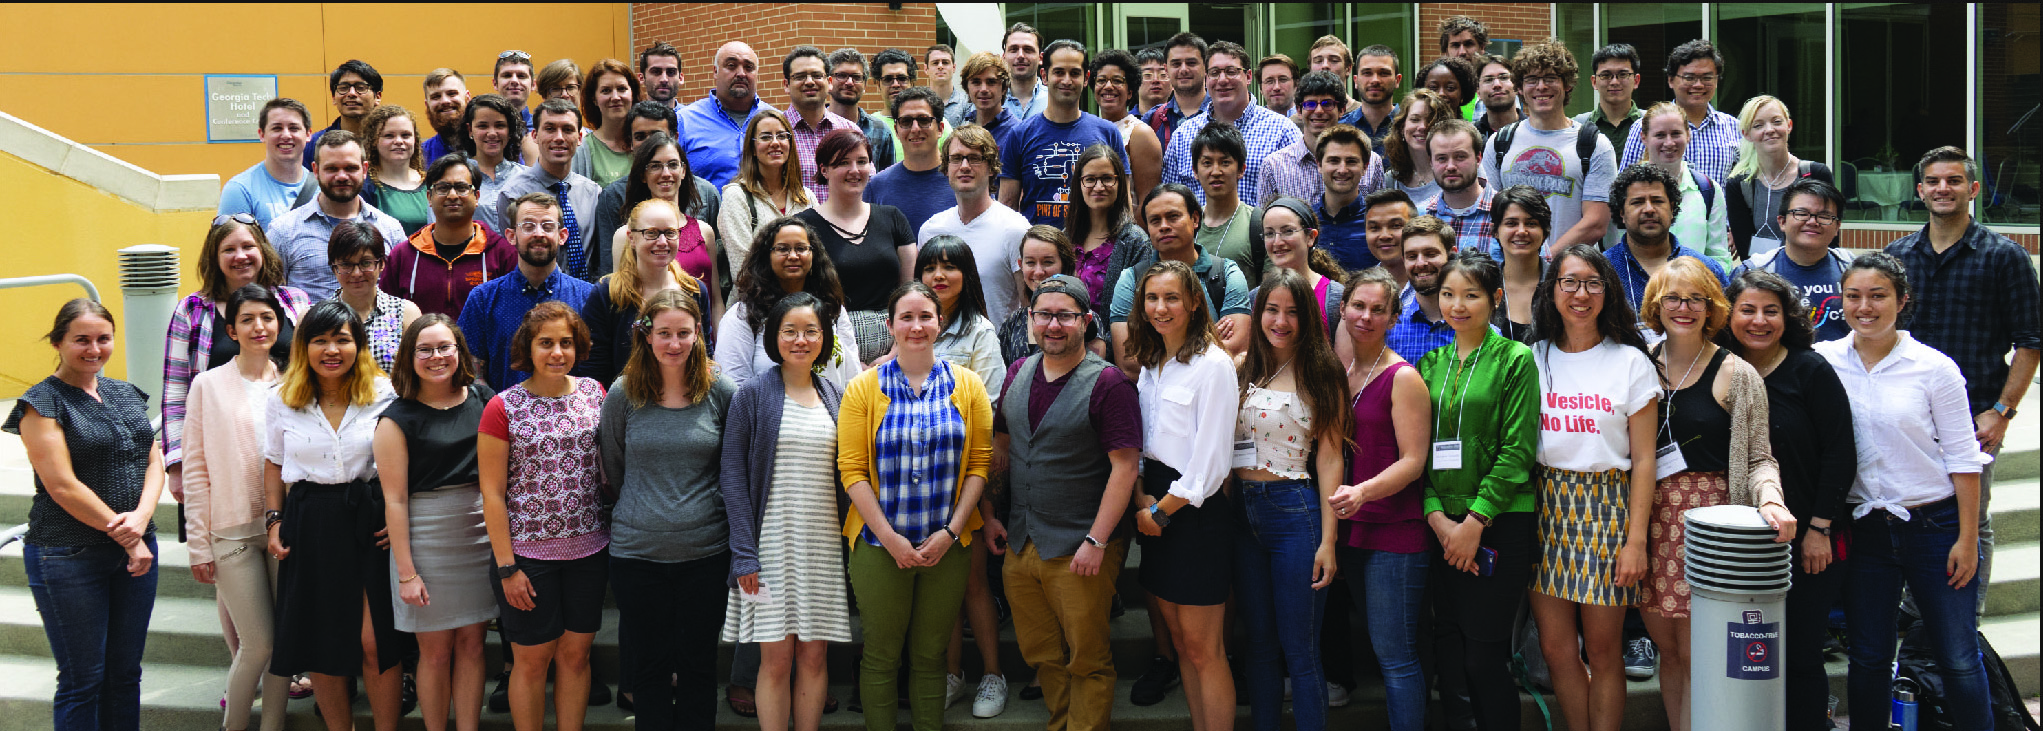 Group photo of the participants at the 2018 Astrobiology Graduate Conference that took place June 4-7, 2018 in Atlanta Georgia. Image credit: AbGradCon Image credit: None